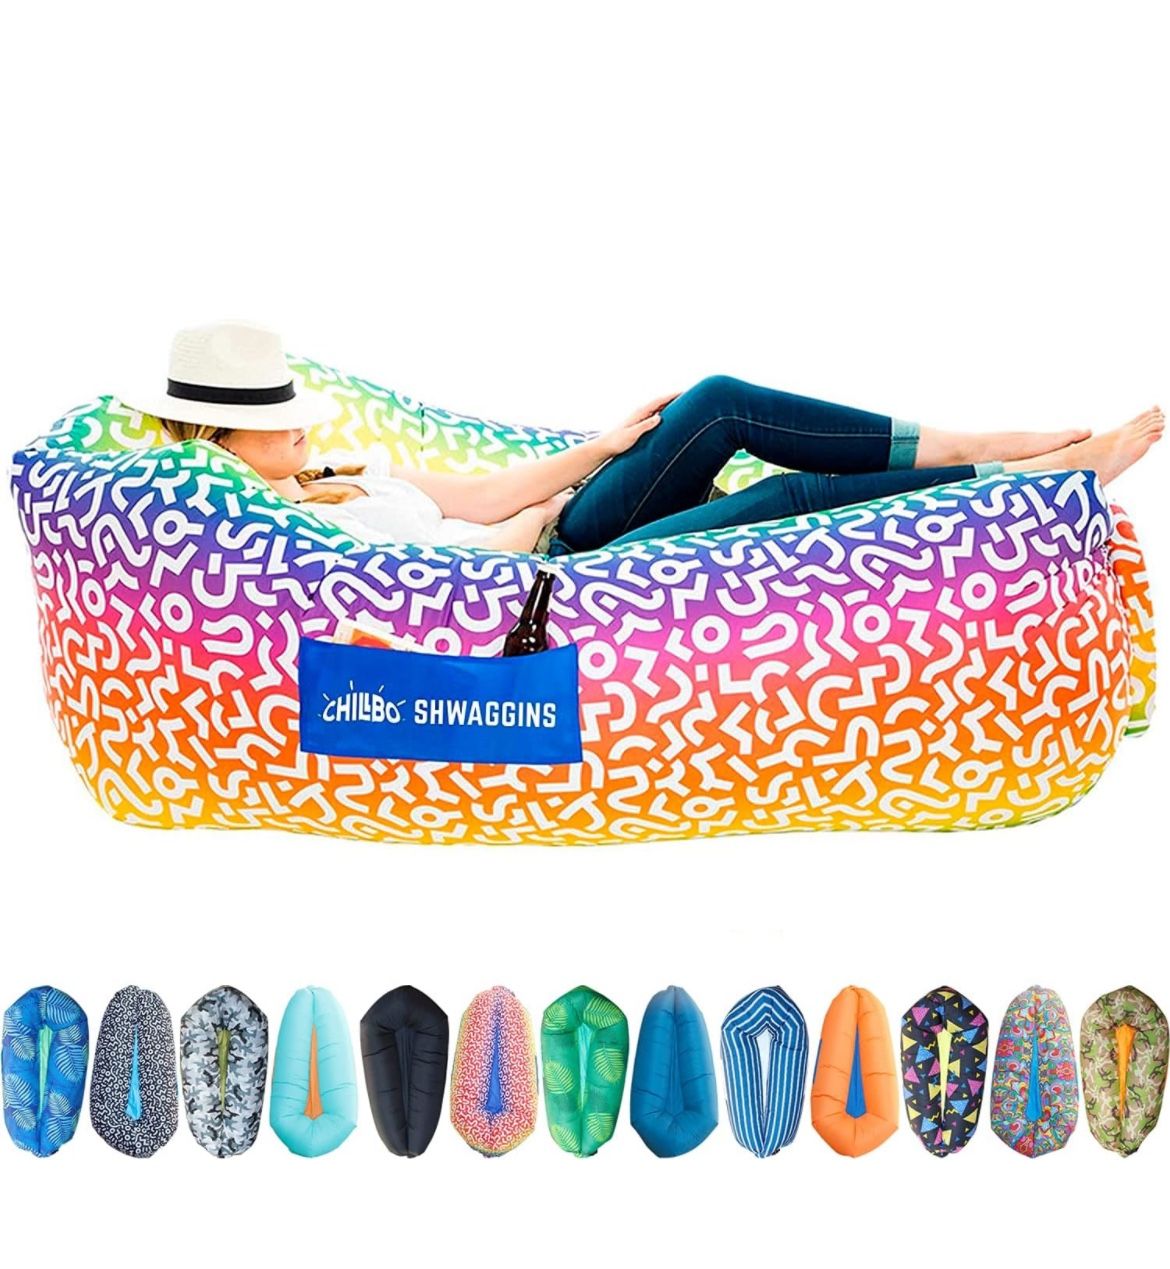 🌈 Elevate your outdoor relaxation with the Chillbo Shwaggins Inflatable Couch in Rainbow Swizzle! 🌈  Designed for ultimate comfort and convenience, 